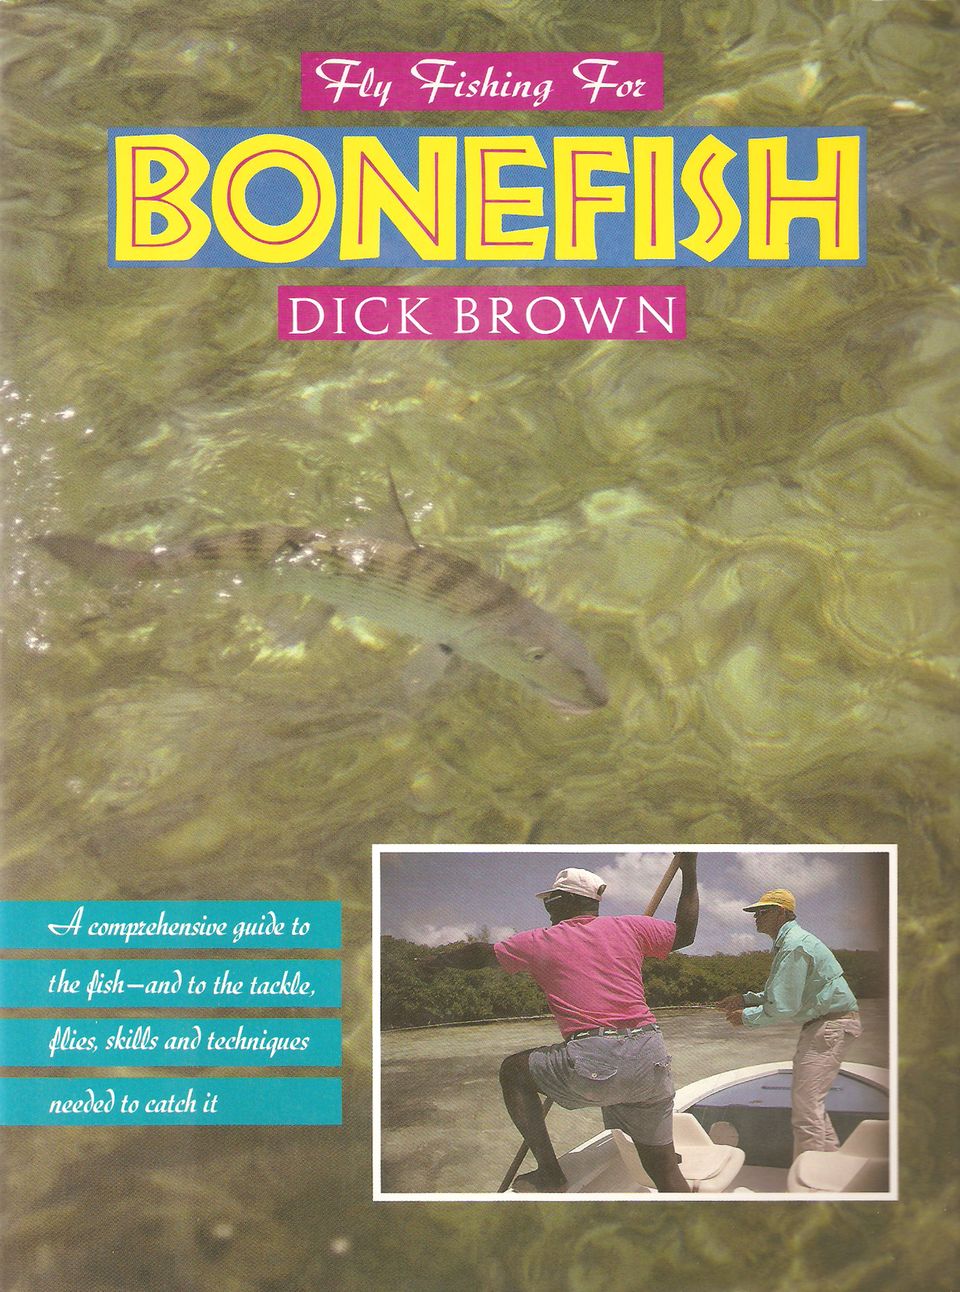 FLY FISHING FOR BONEFISH. By Dick Brown. by Brown (Dick). (b. 1942).:  (1993) Signed by Author(s)